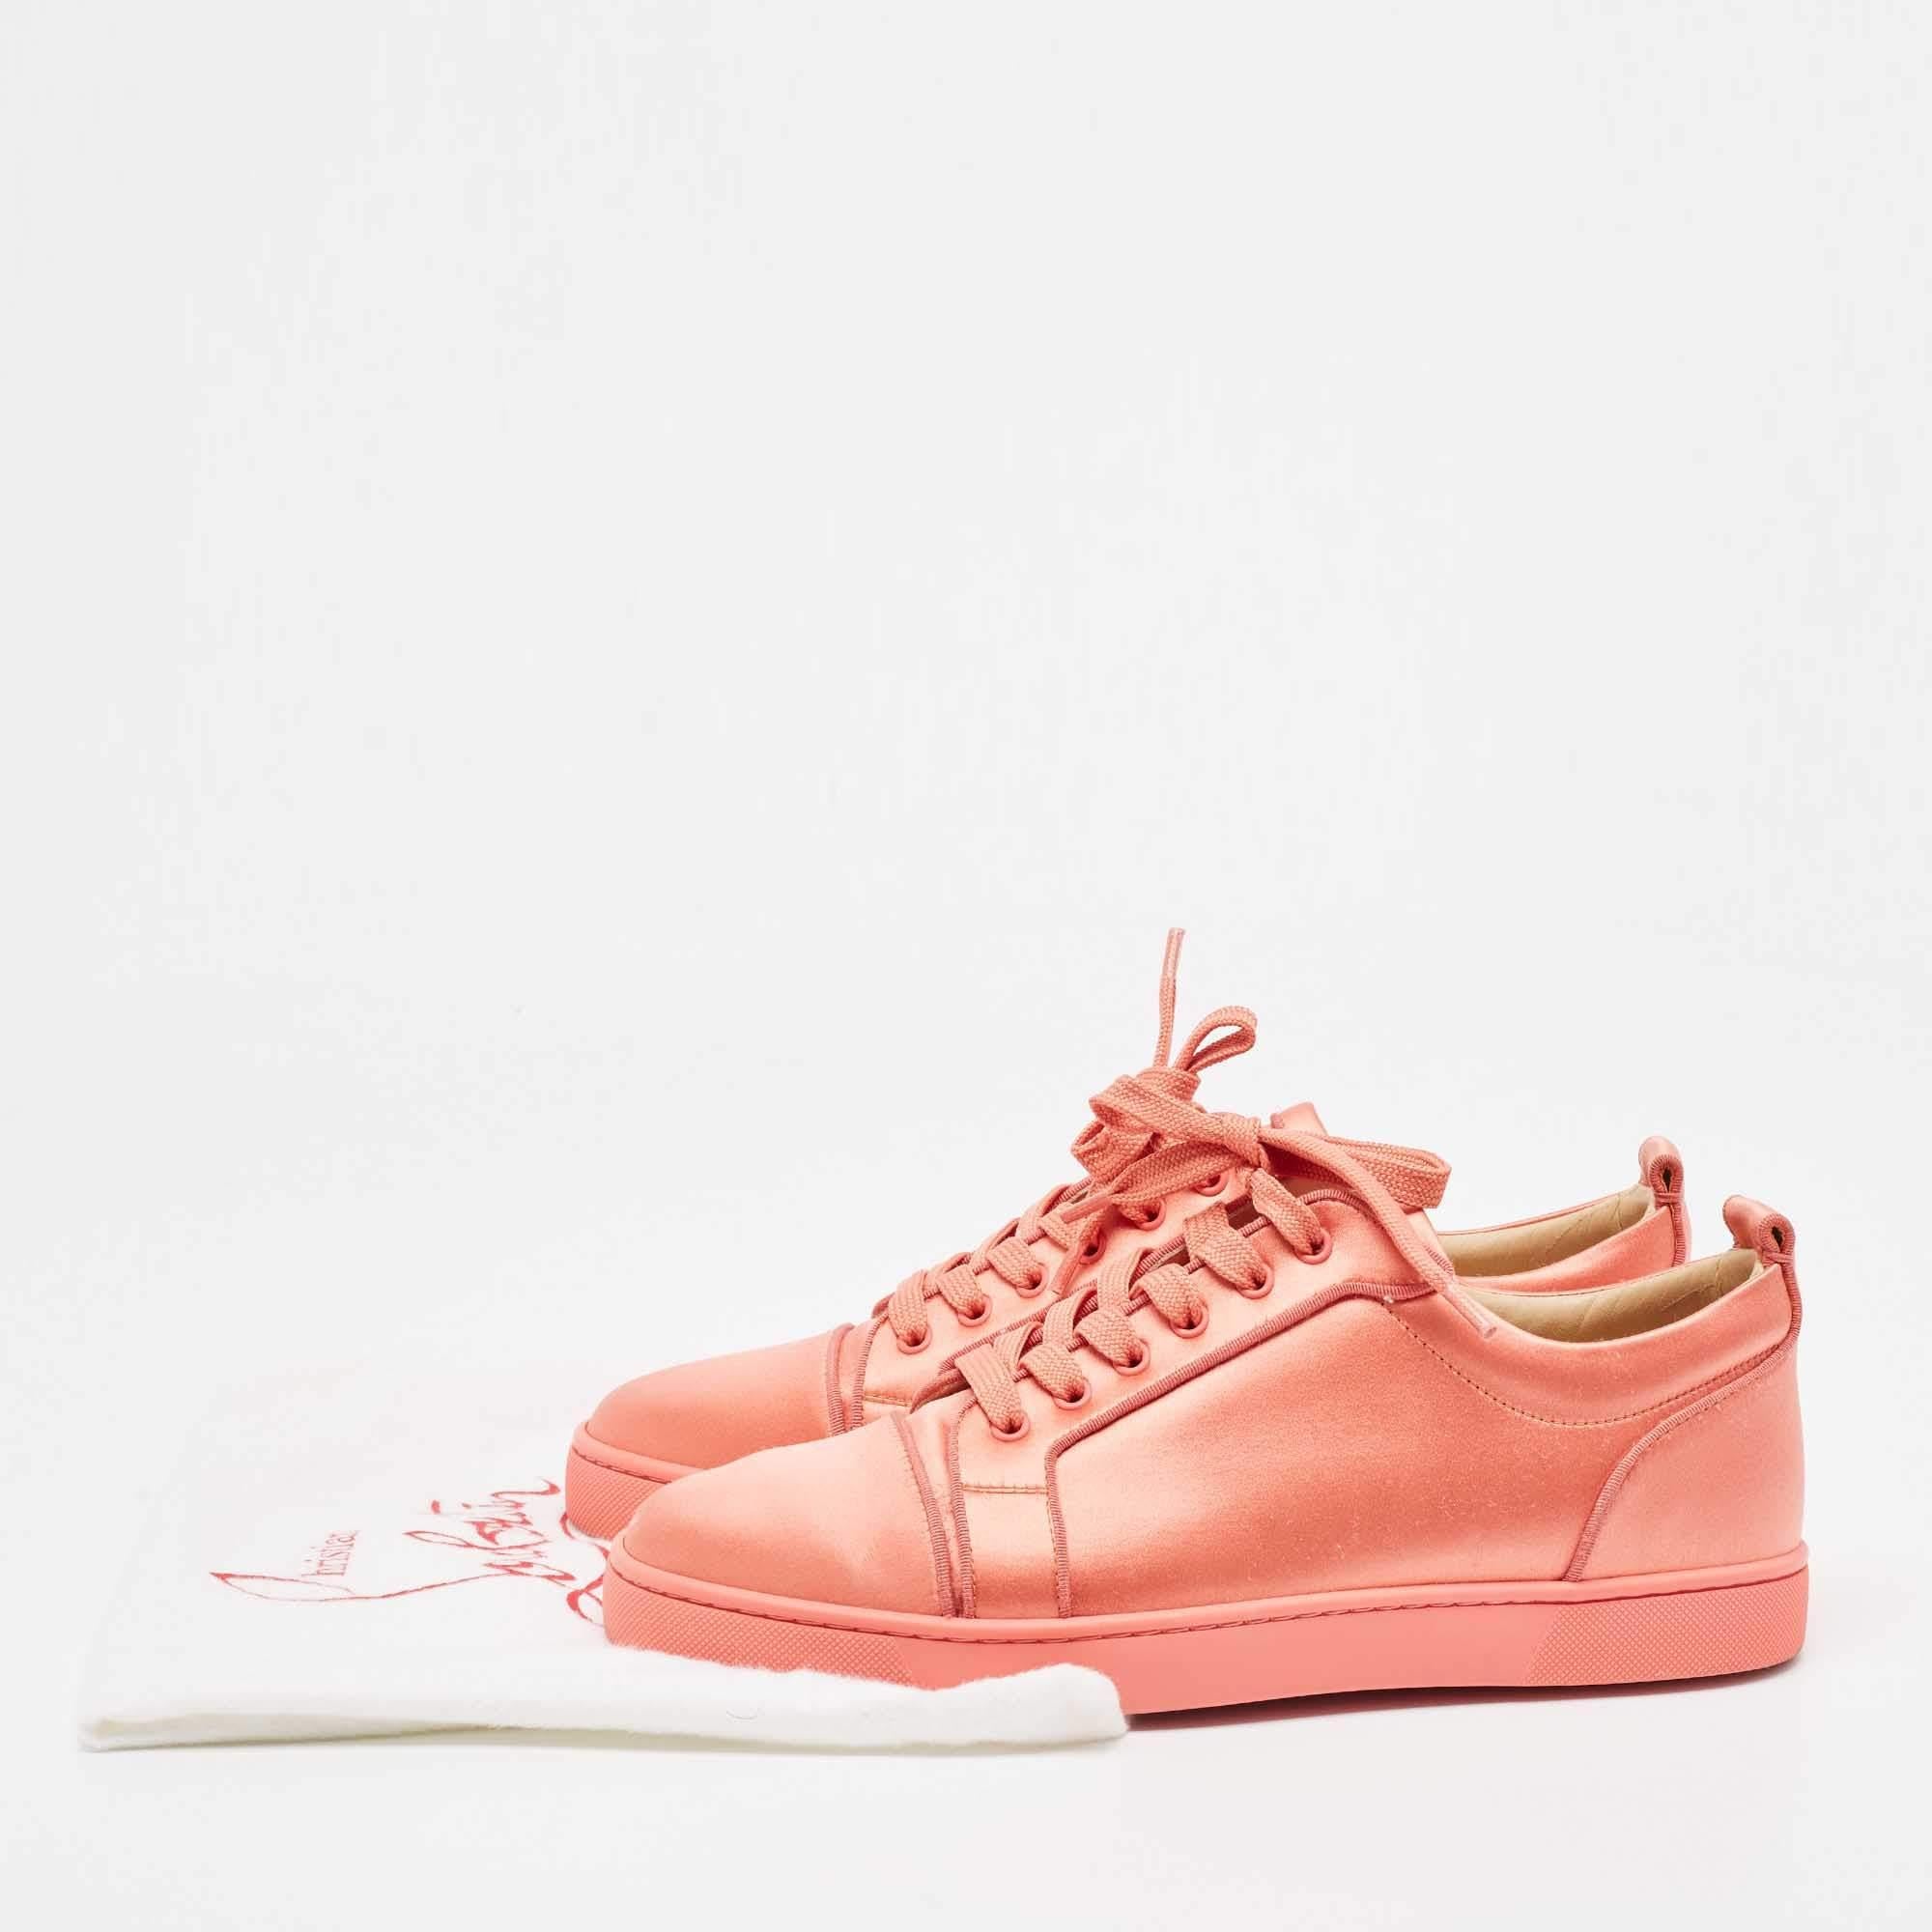 Christian Louboutin Pink Satin Louis Junior Orlato Low Top Sneakers Size 43.5 For Sale 5